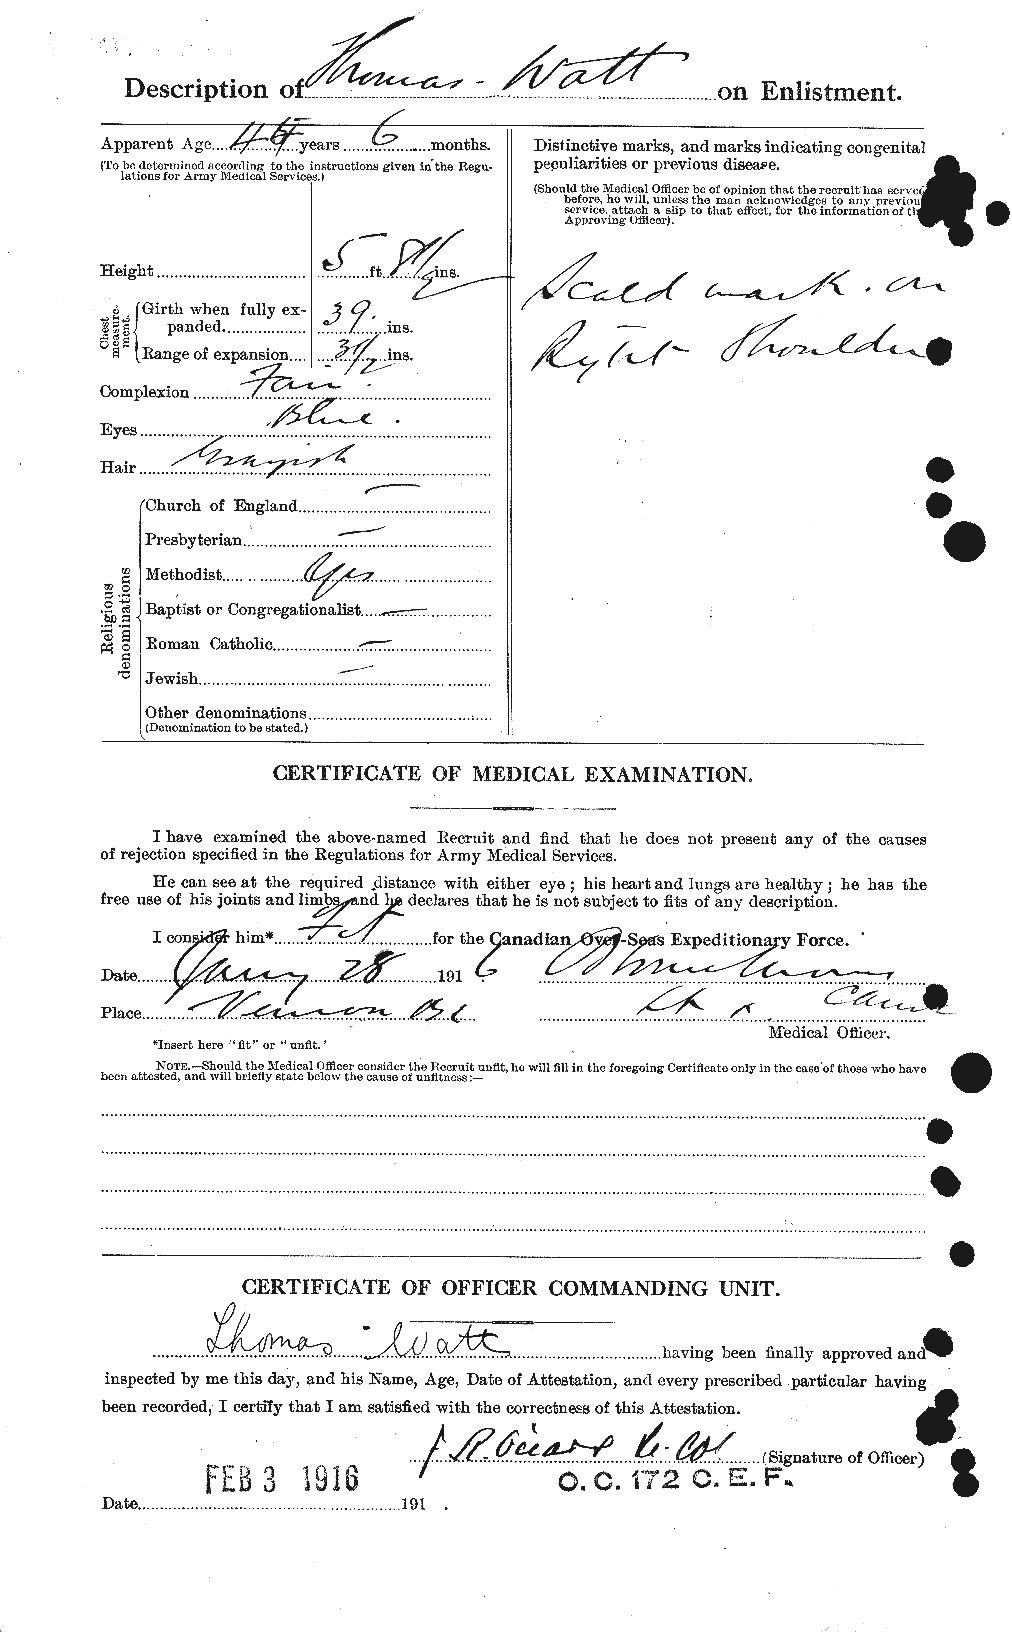 Personnel Records of the First World War - CEF 660541b